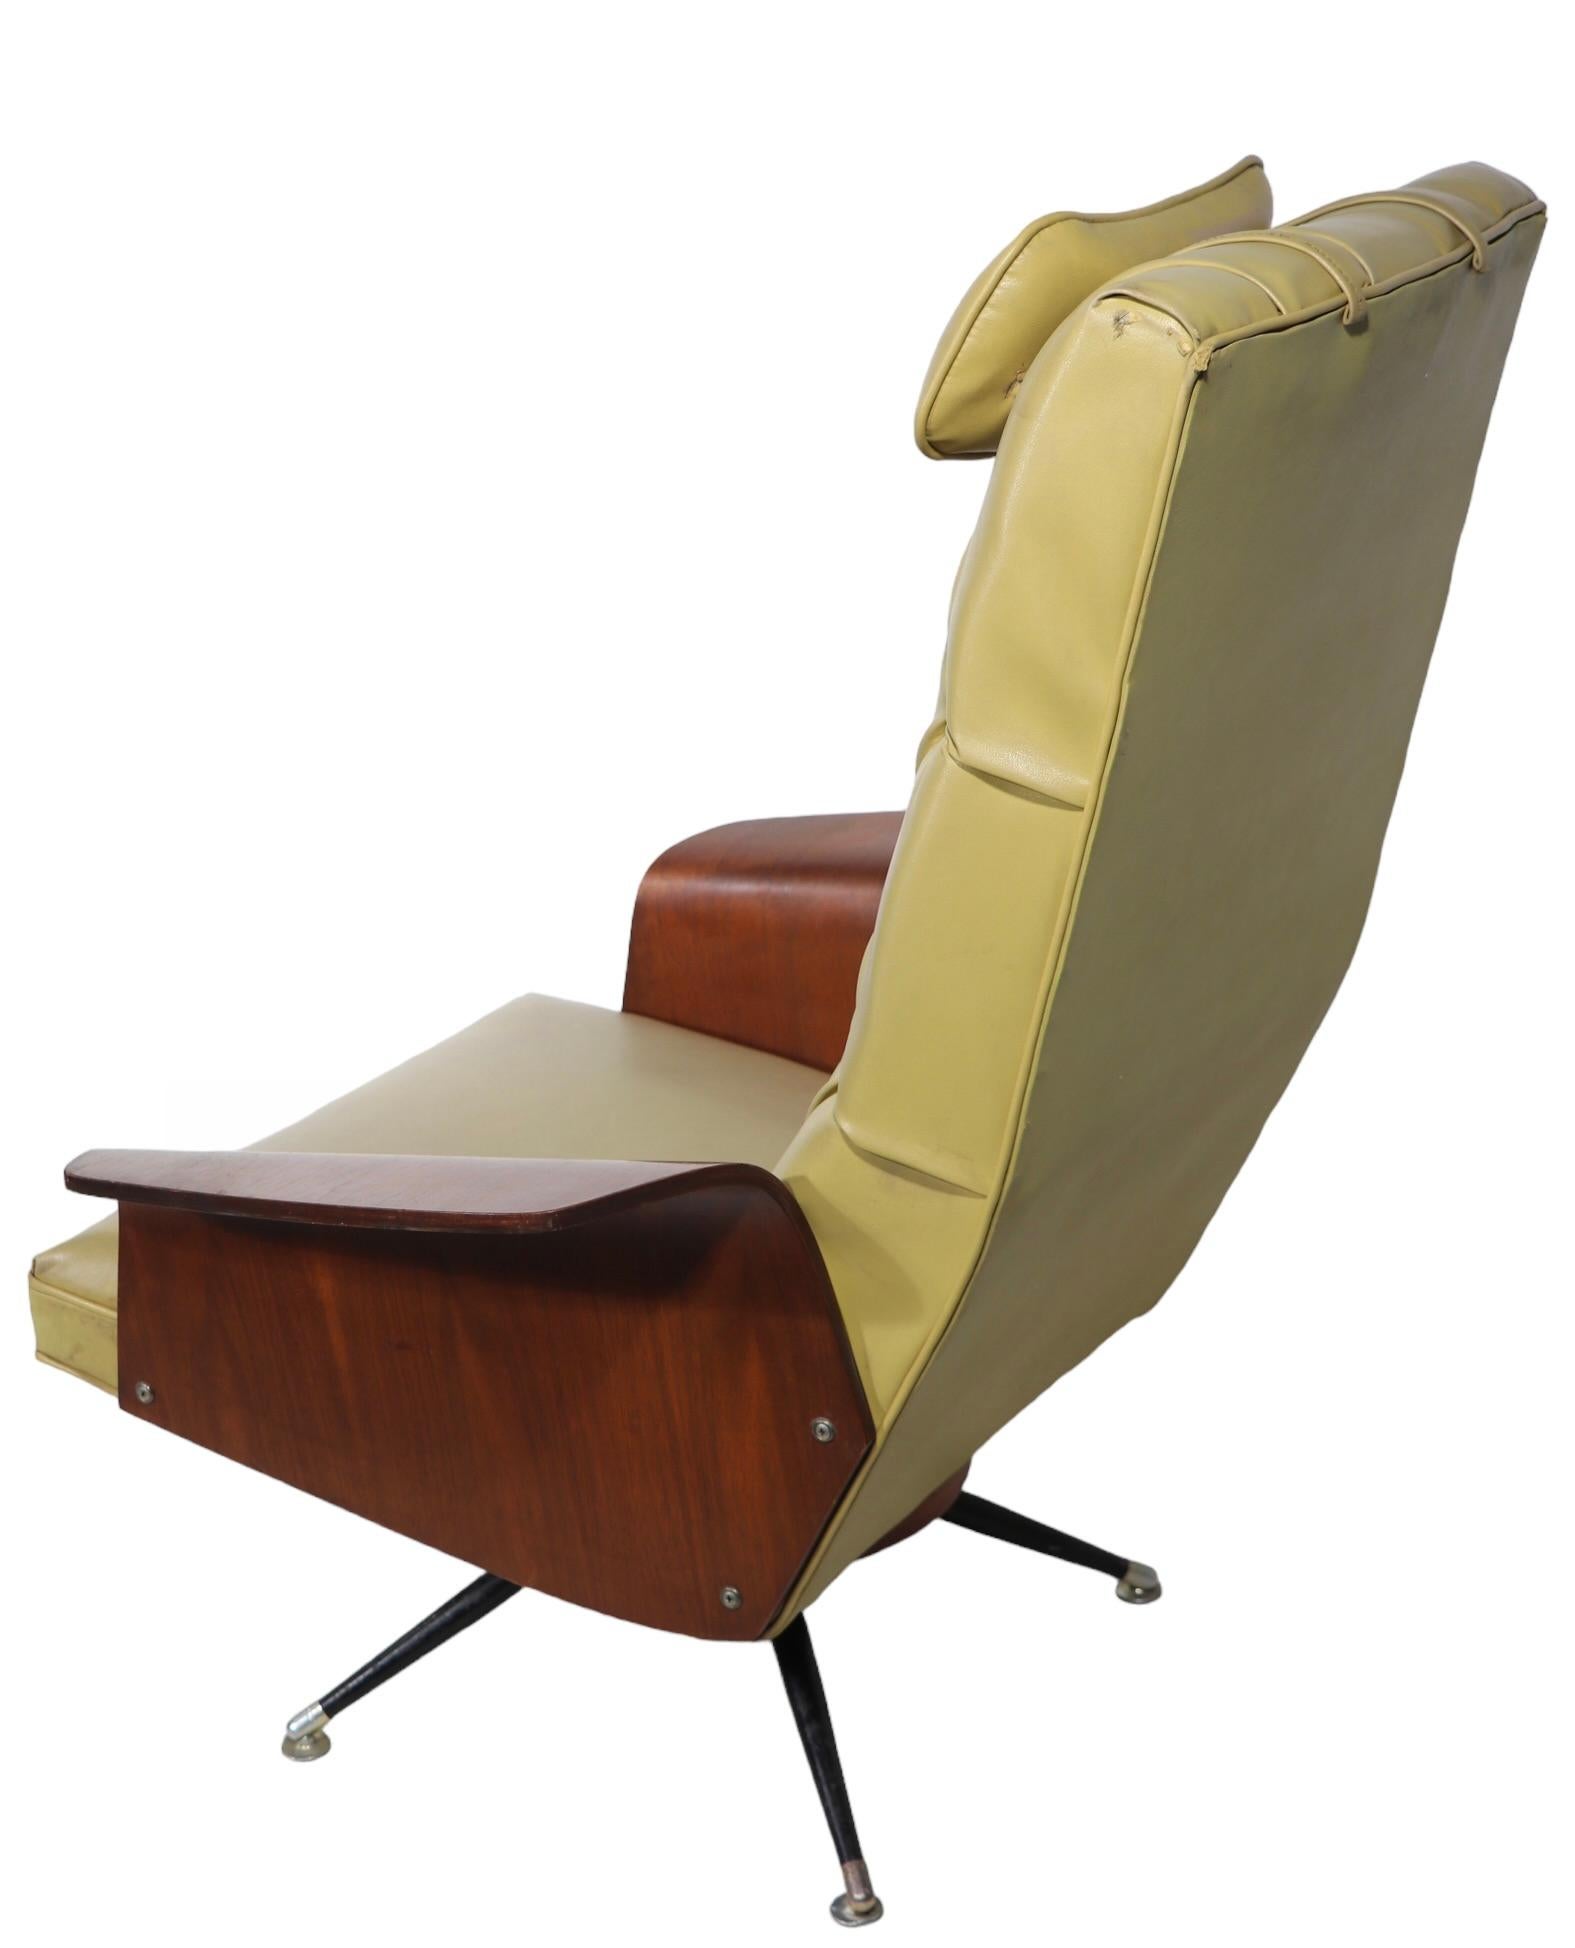 20th Century Mid Century Lounge Chair and Ottoman by Murphy Miller for Plycraft c 1950’s For Sale